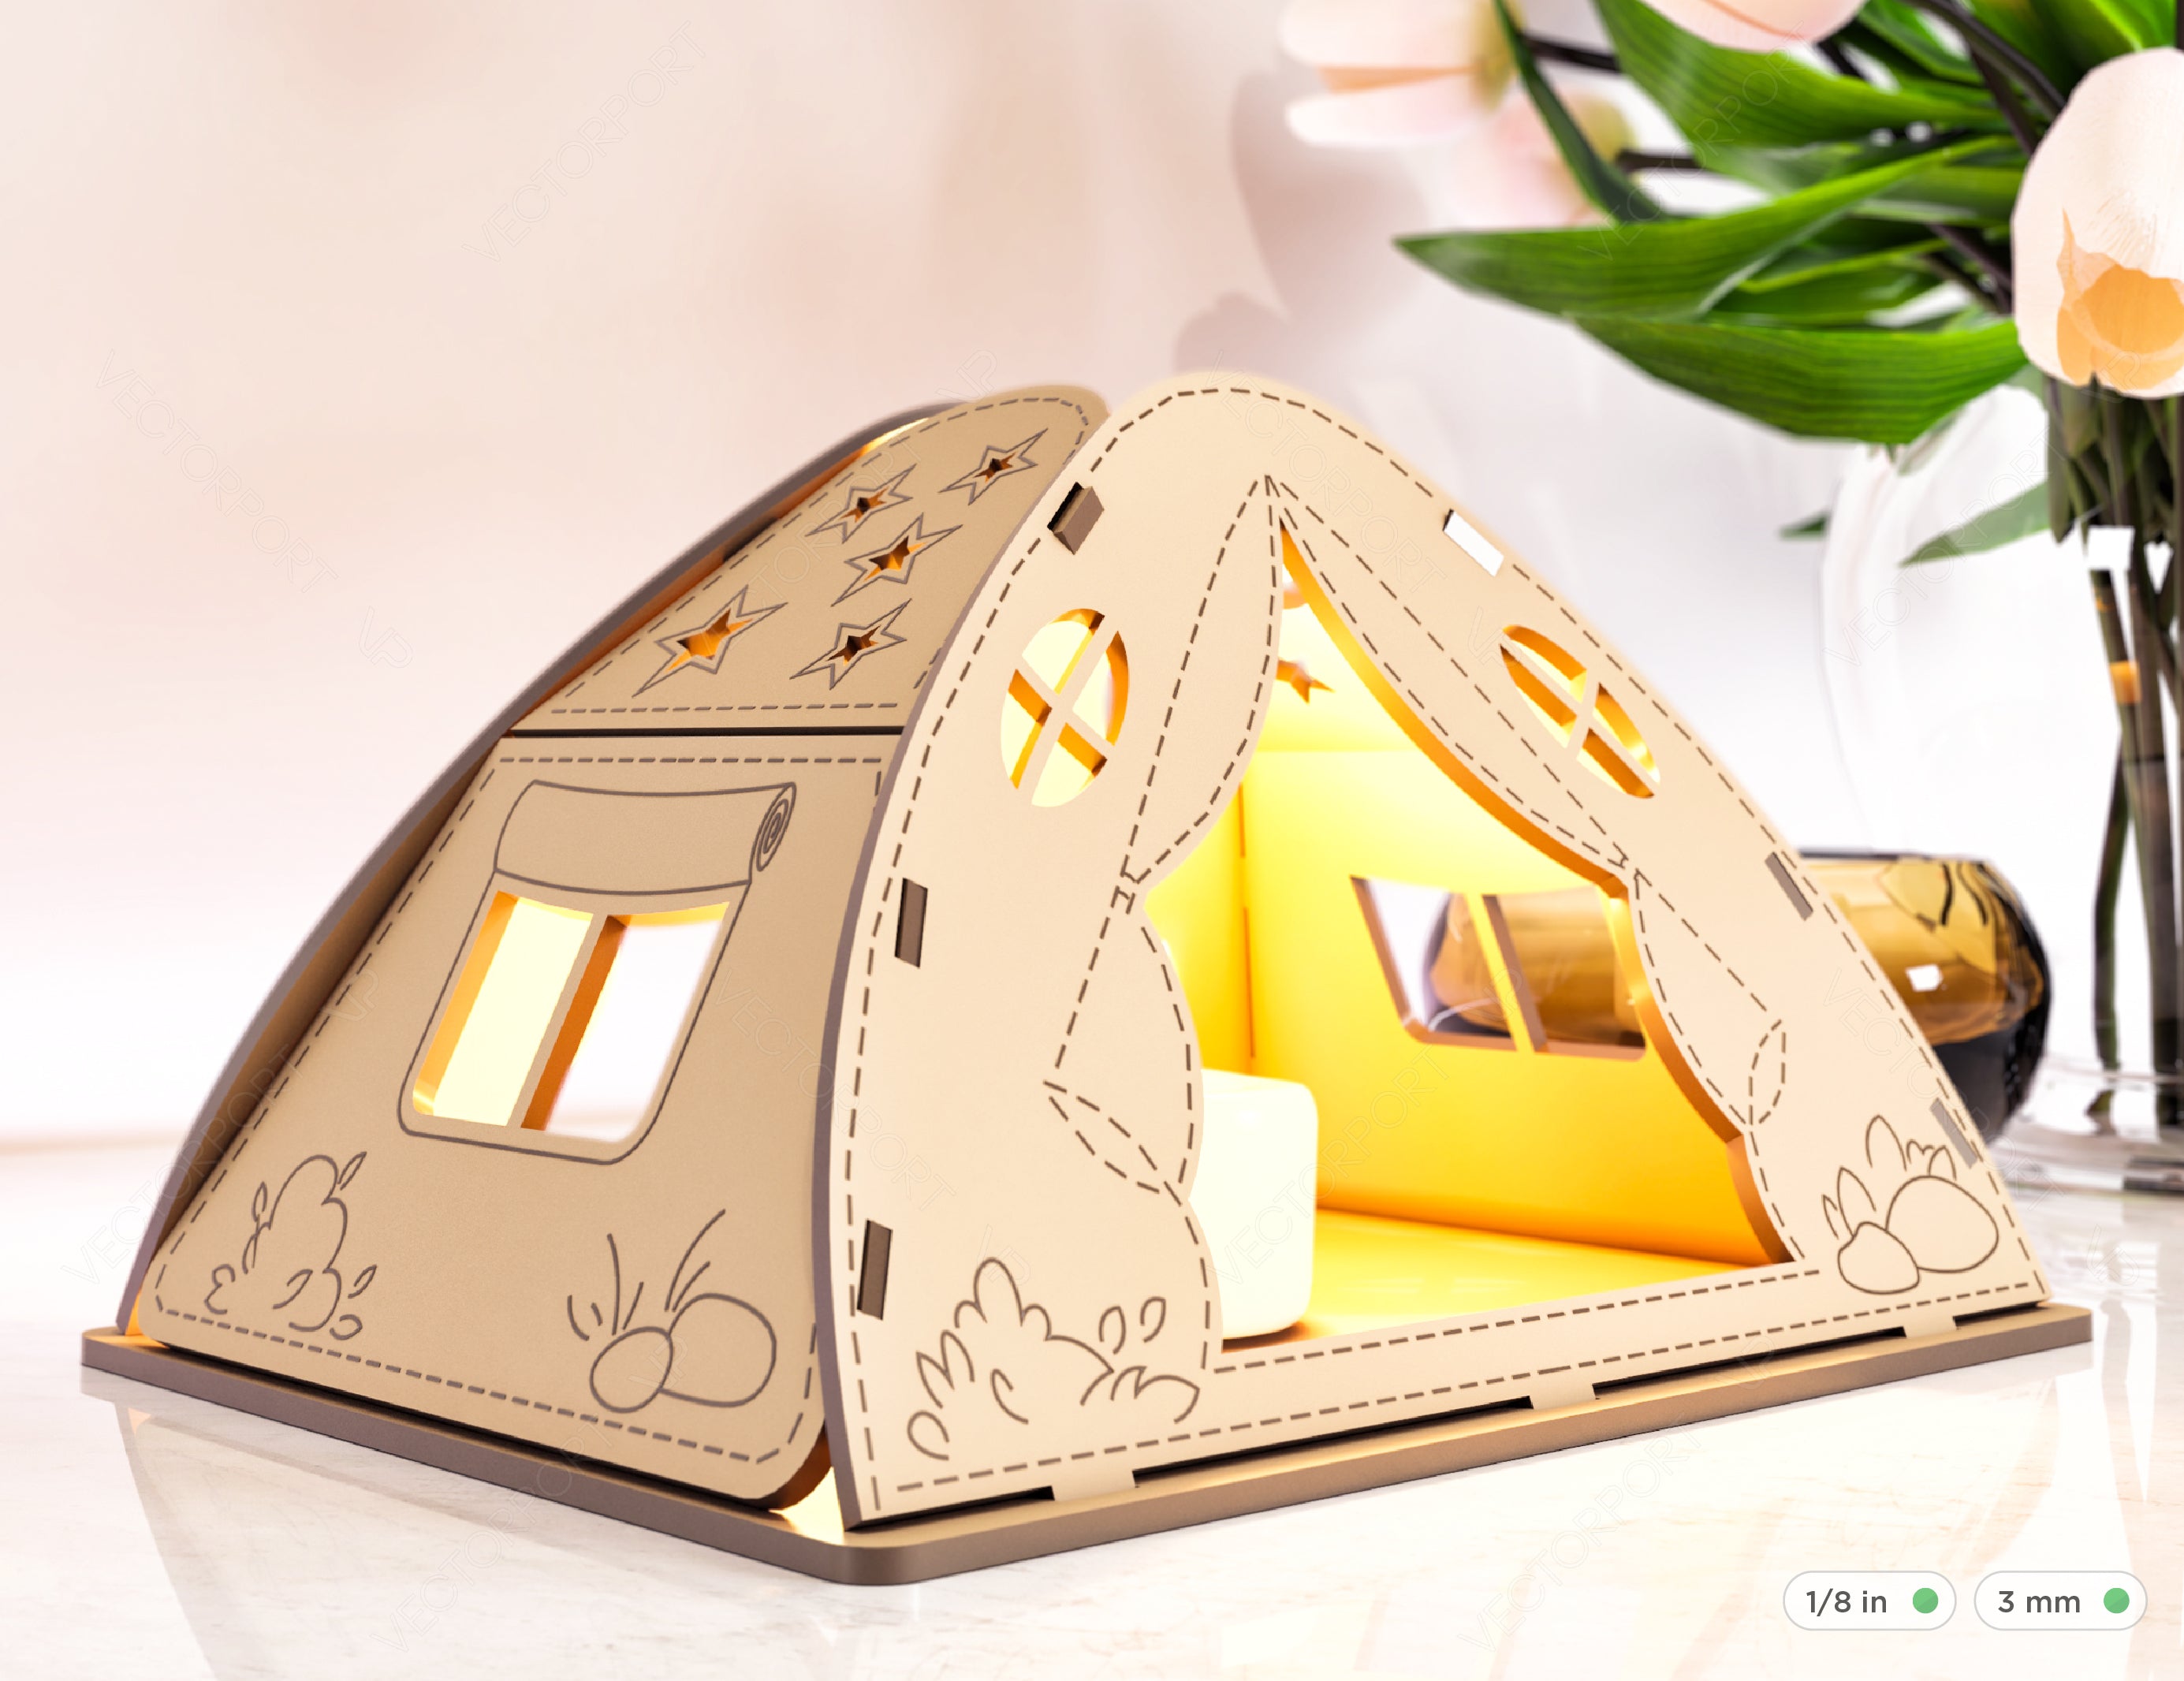 Wooden Tent Shape Laser Cut Night Light Lamp Mdf Laser Cutting Camping Tent Home Lampshade Table Candle Holder Tea light SVG |#158|